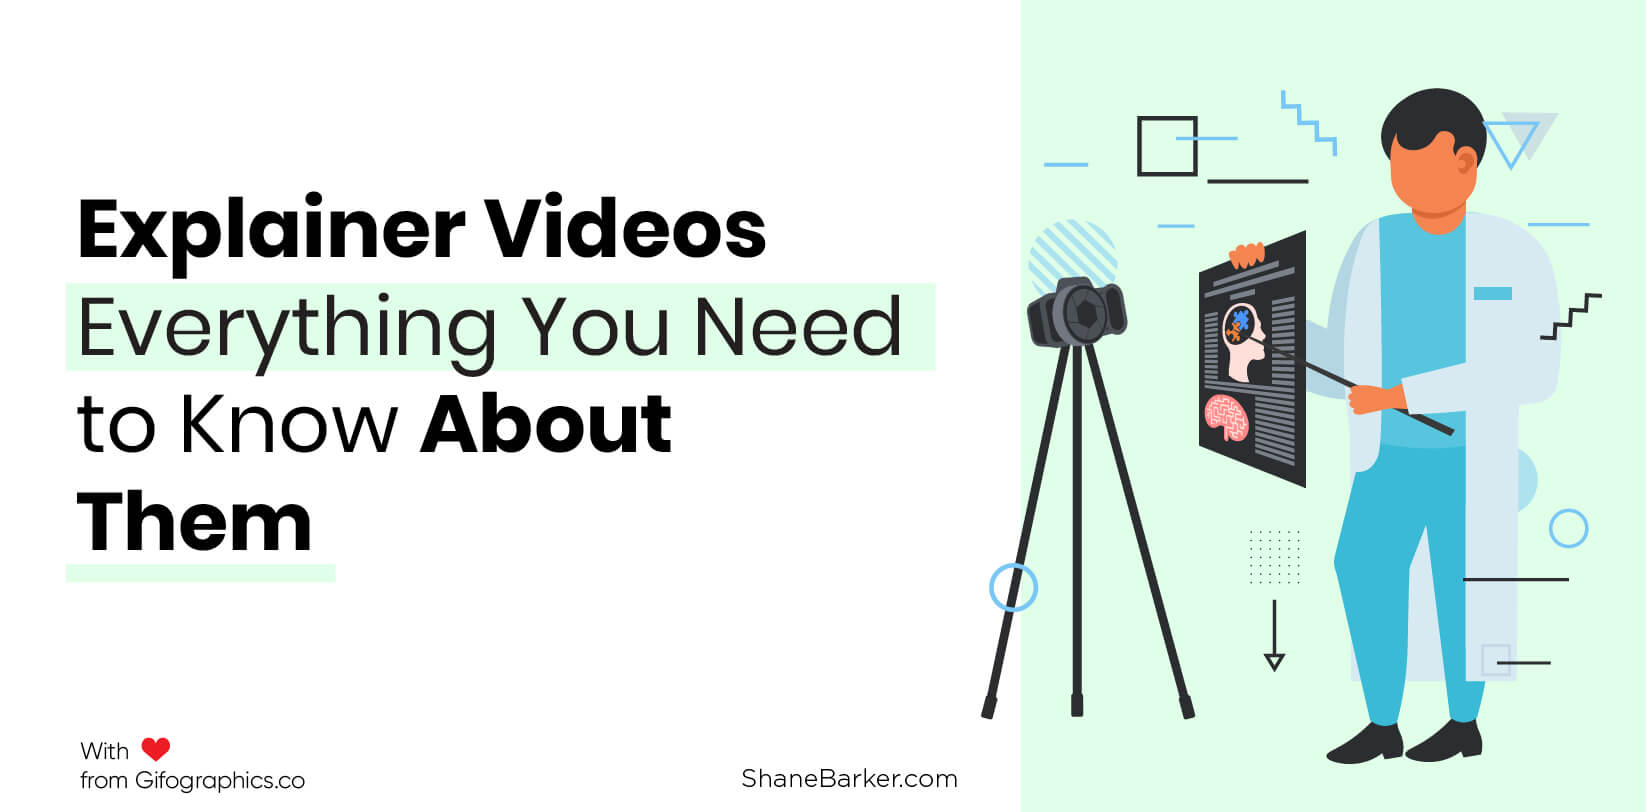 Explainer Videos Everything You Need to Know About Them